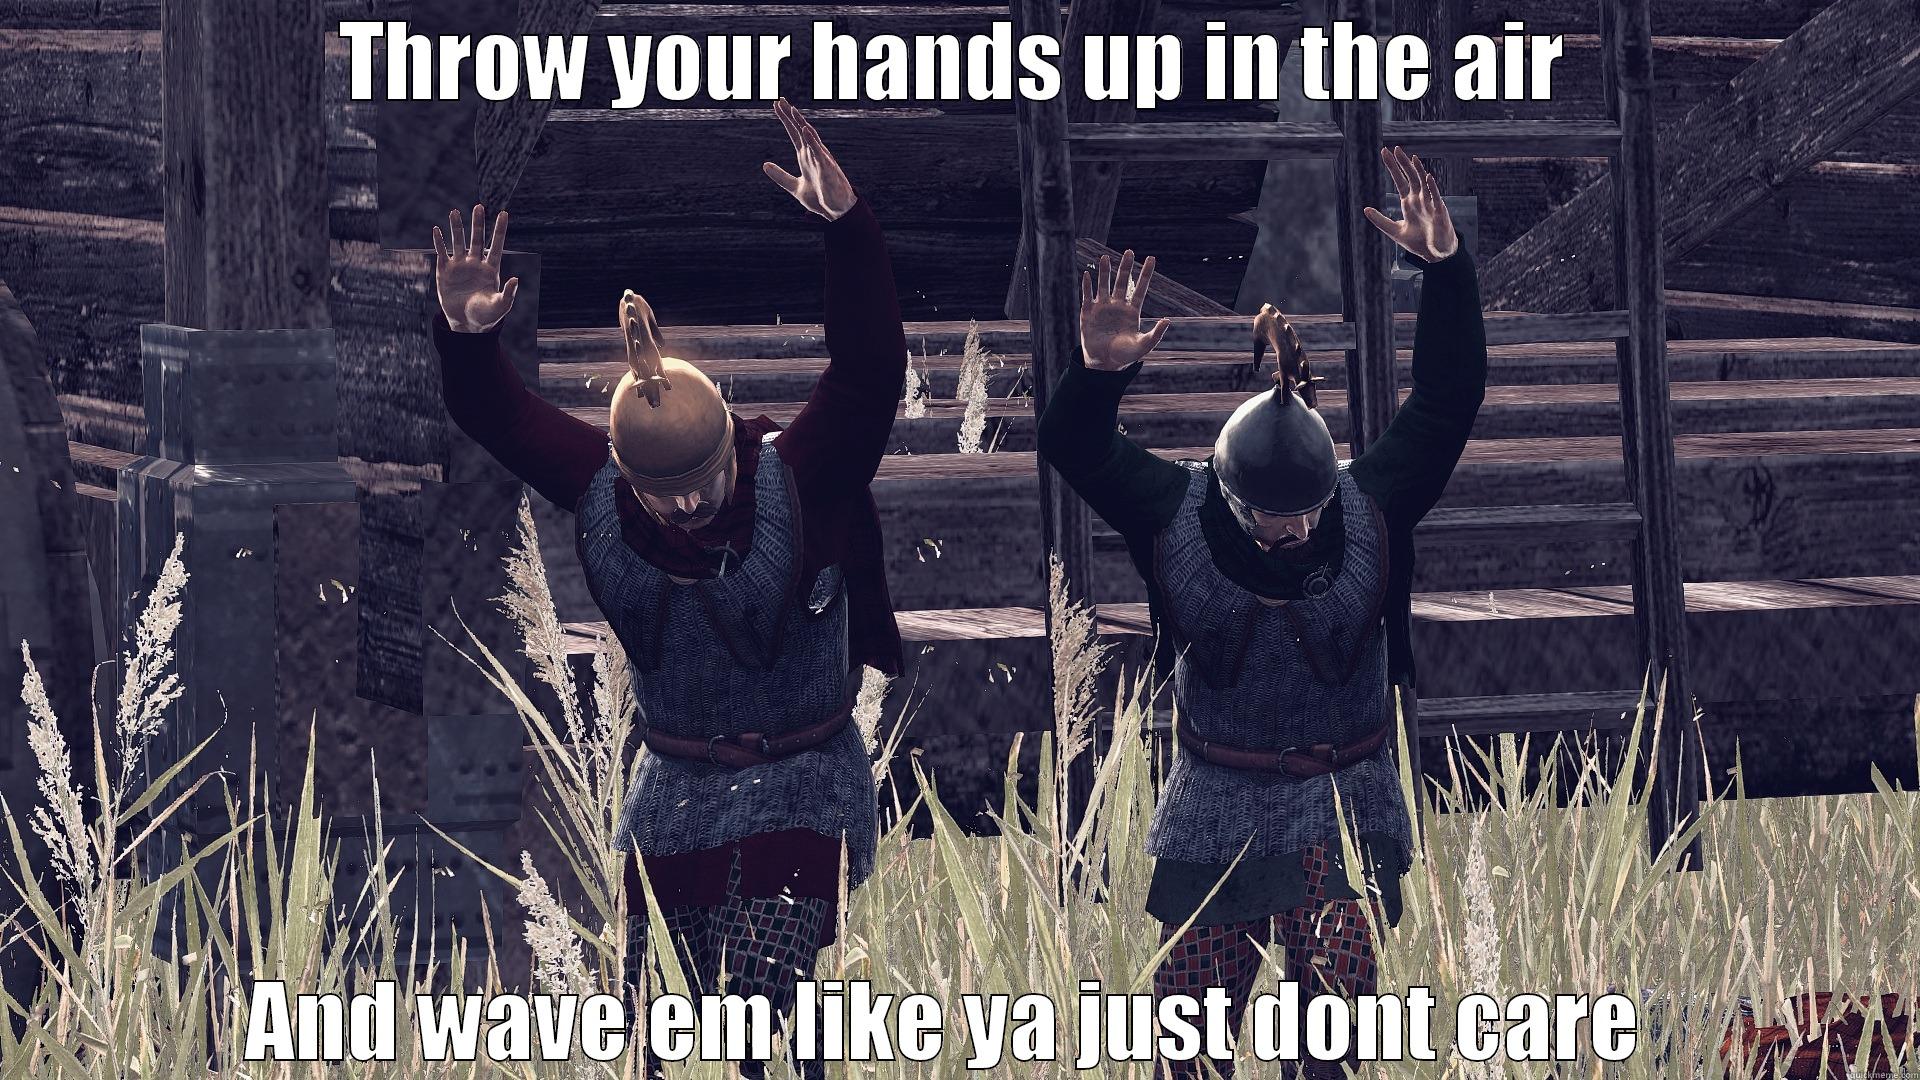 Rome II dance - THROW YOUR HANDS UP IN THE AIR AND WAVE EM LIKE YA JUST DONT CARE  Misc